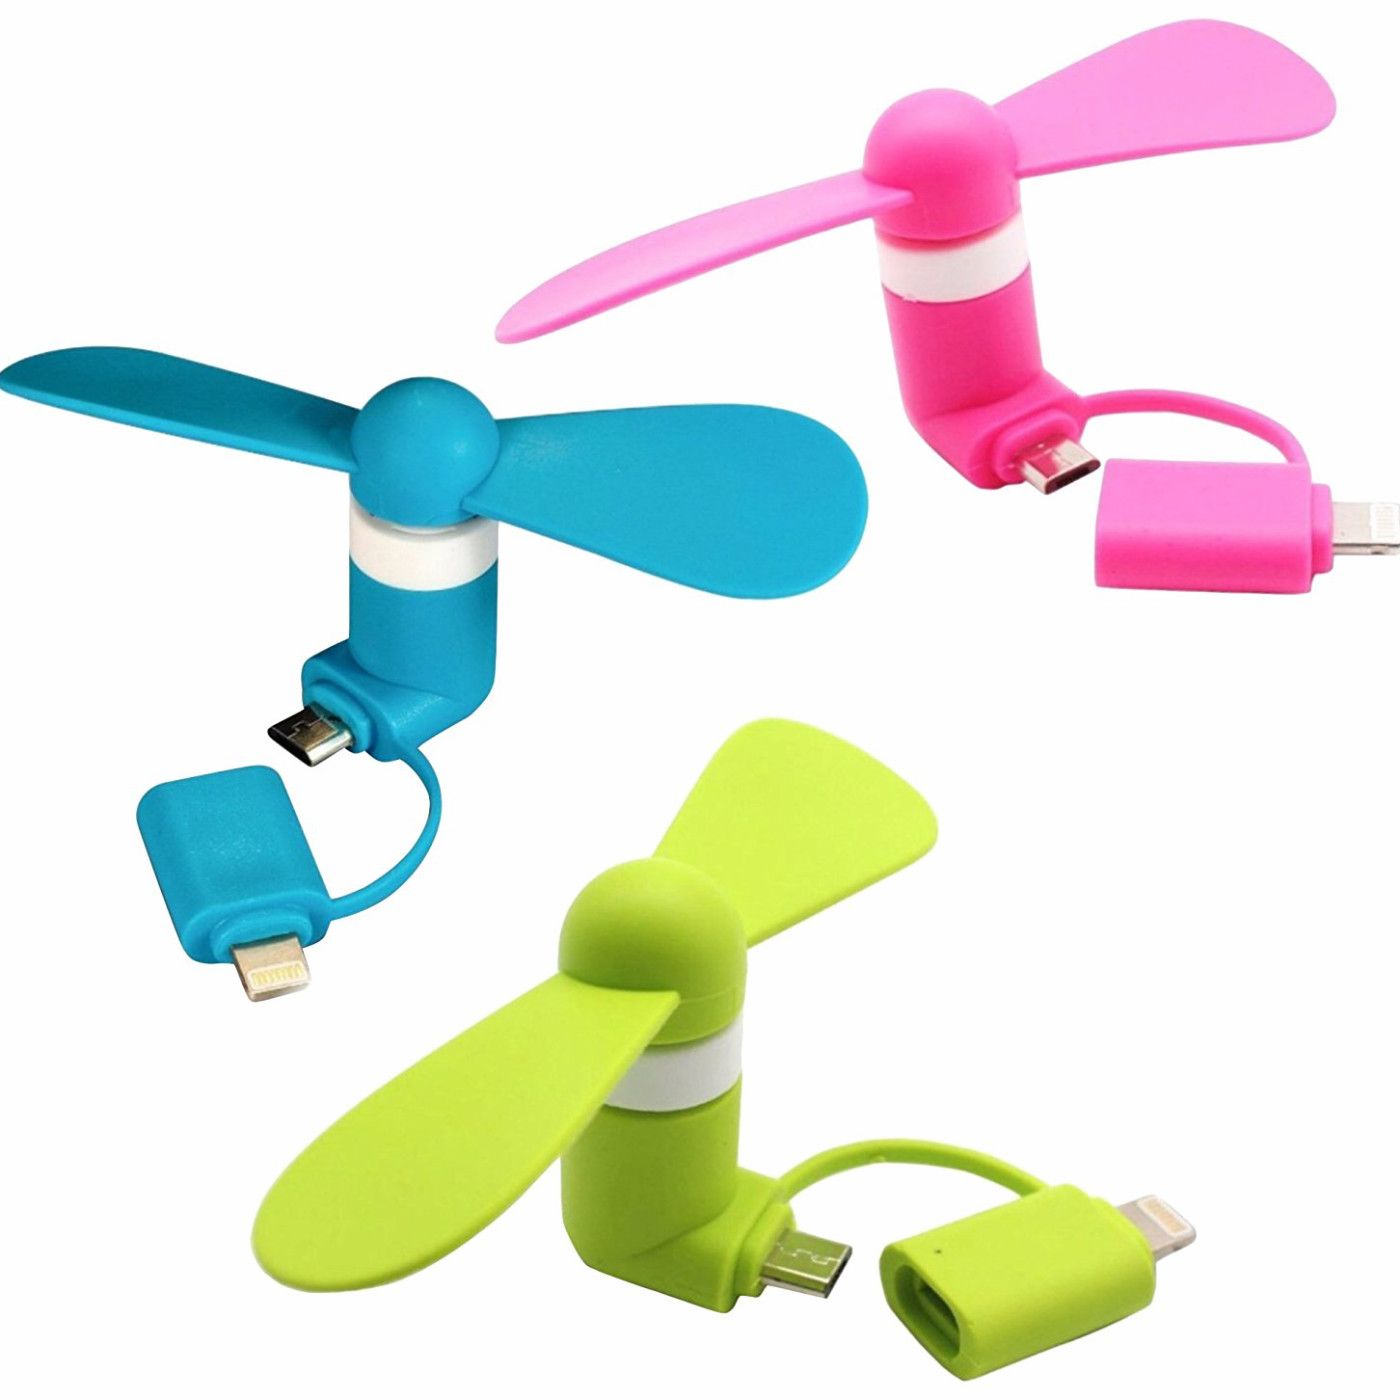 P46 Digital Mini Fan 2-in-1 Mini for iPhoneiPad and Android Pink/Blue/Green - 3 Piece